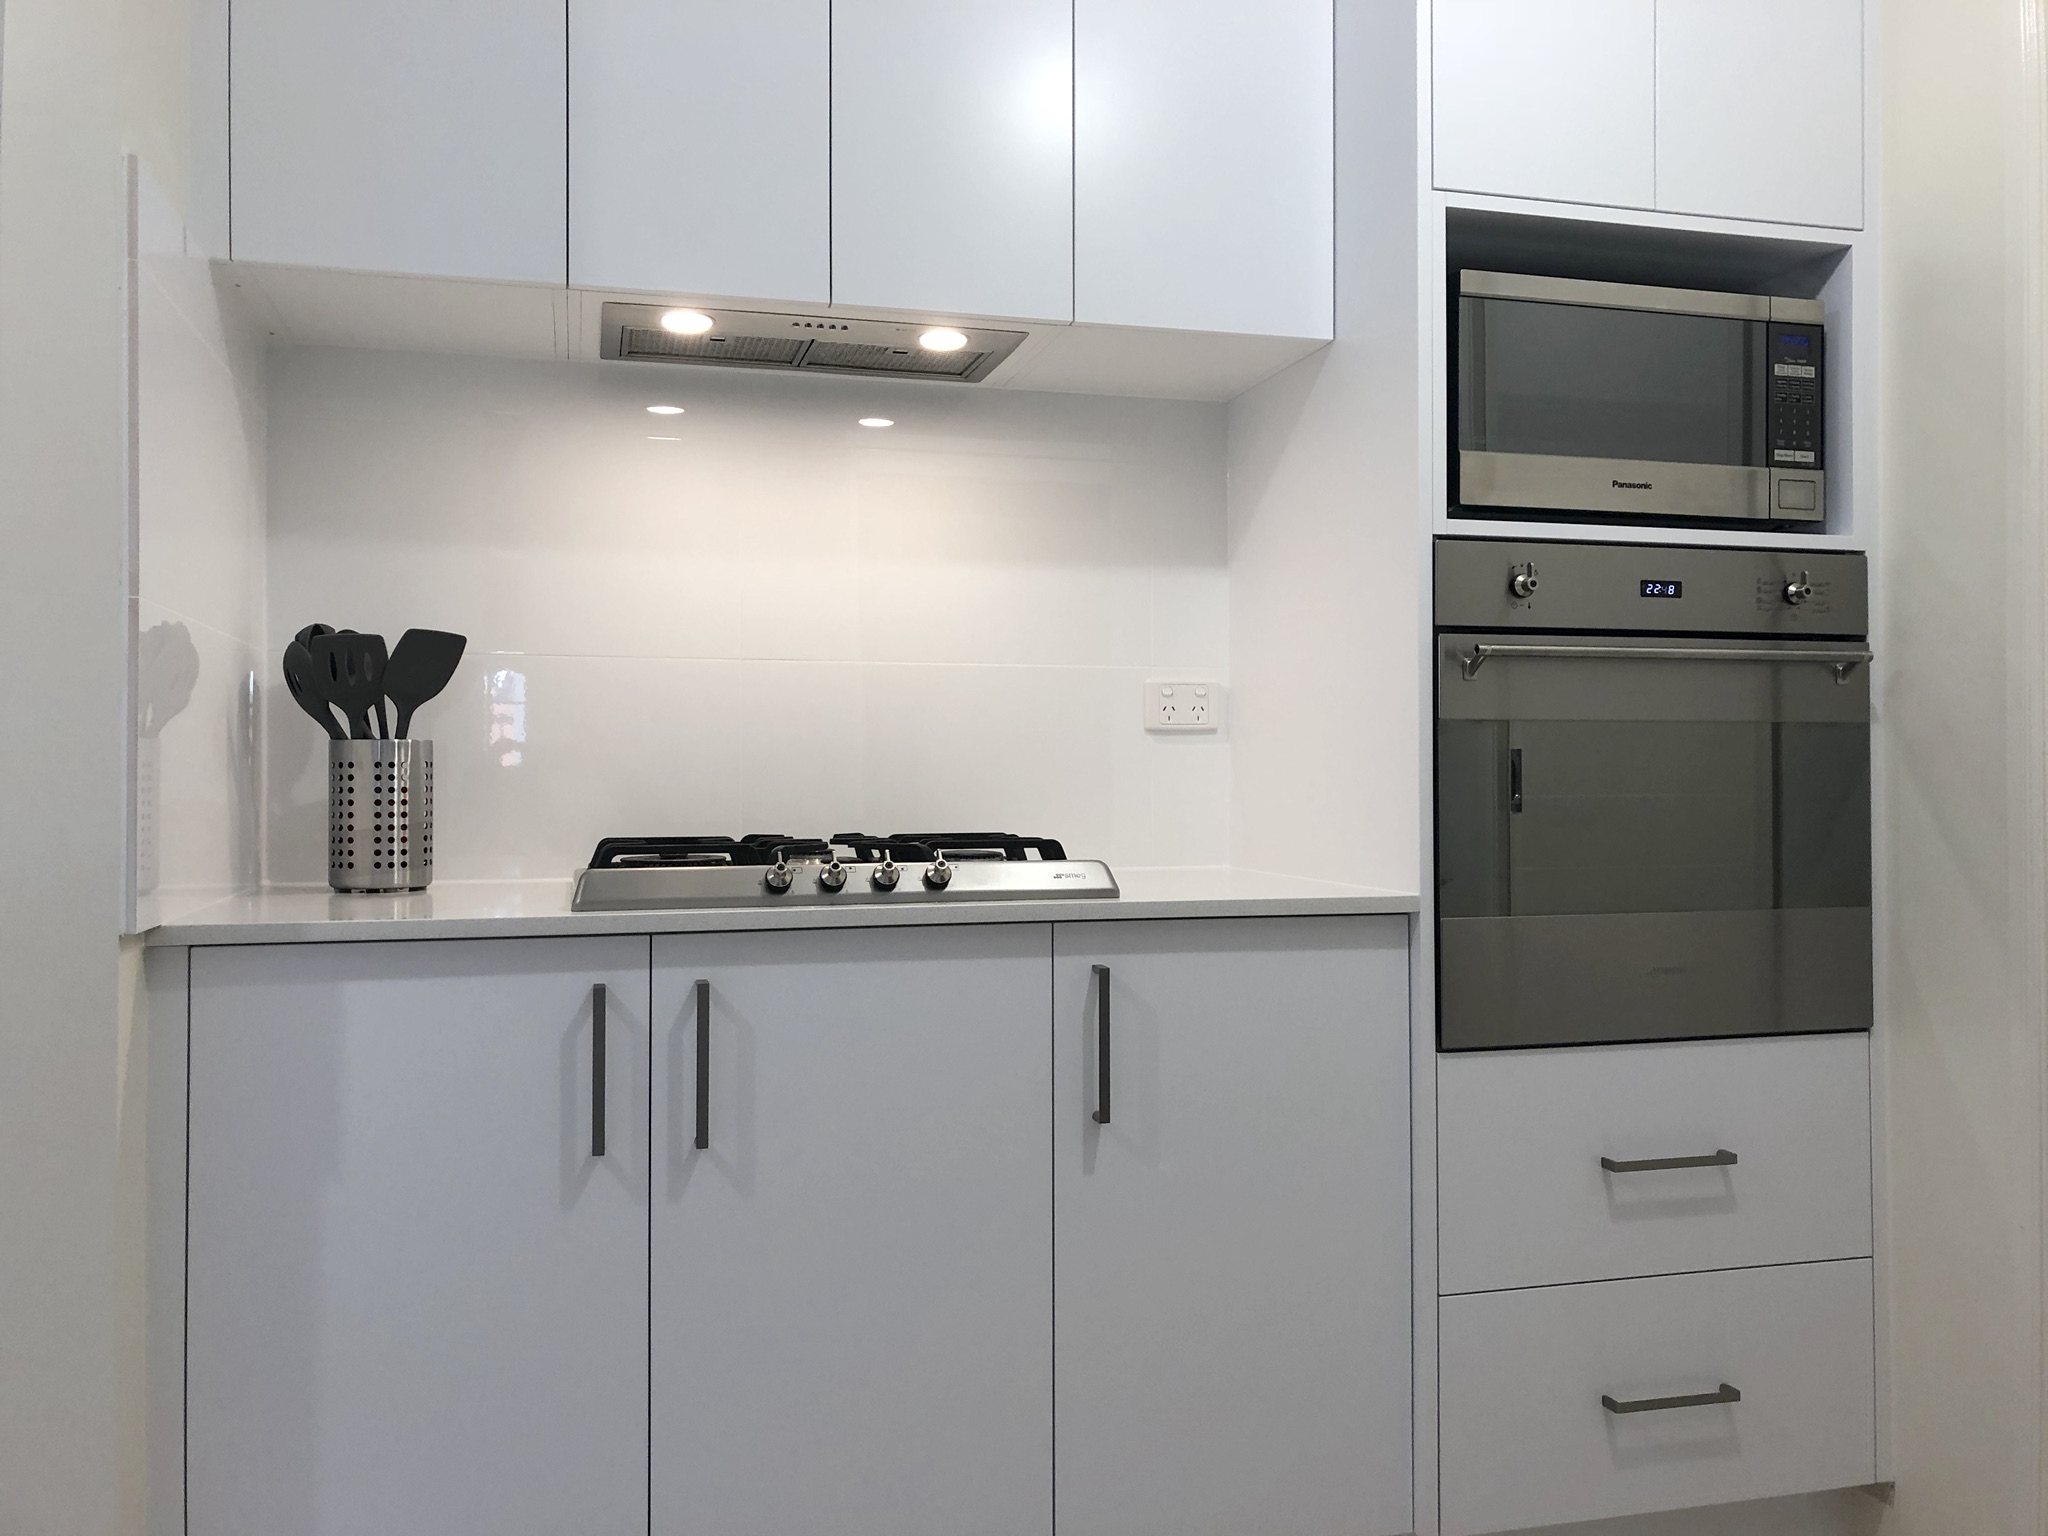 Stainless steel gas cooktop and extractor fan, wall oven and microwave with tiled splashback.